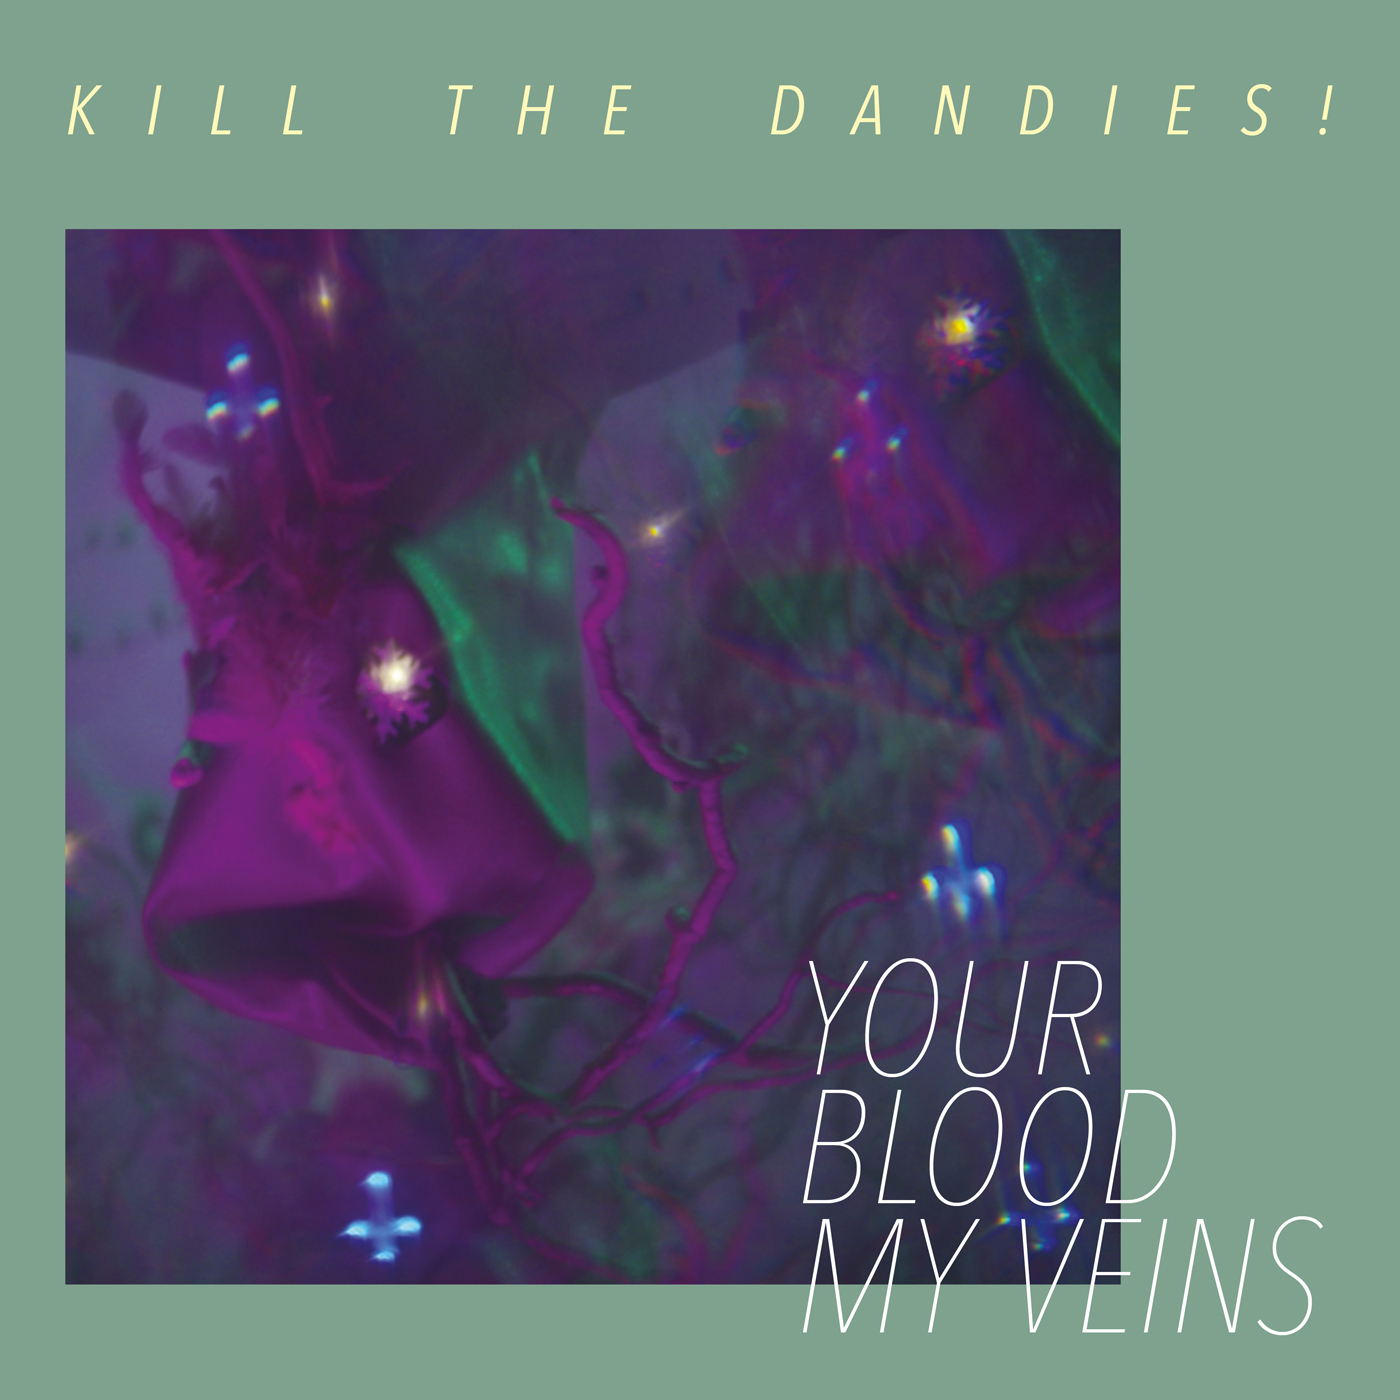 Kill The Dandies! - Your Blood My Veins